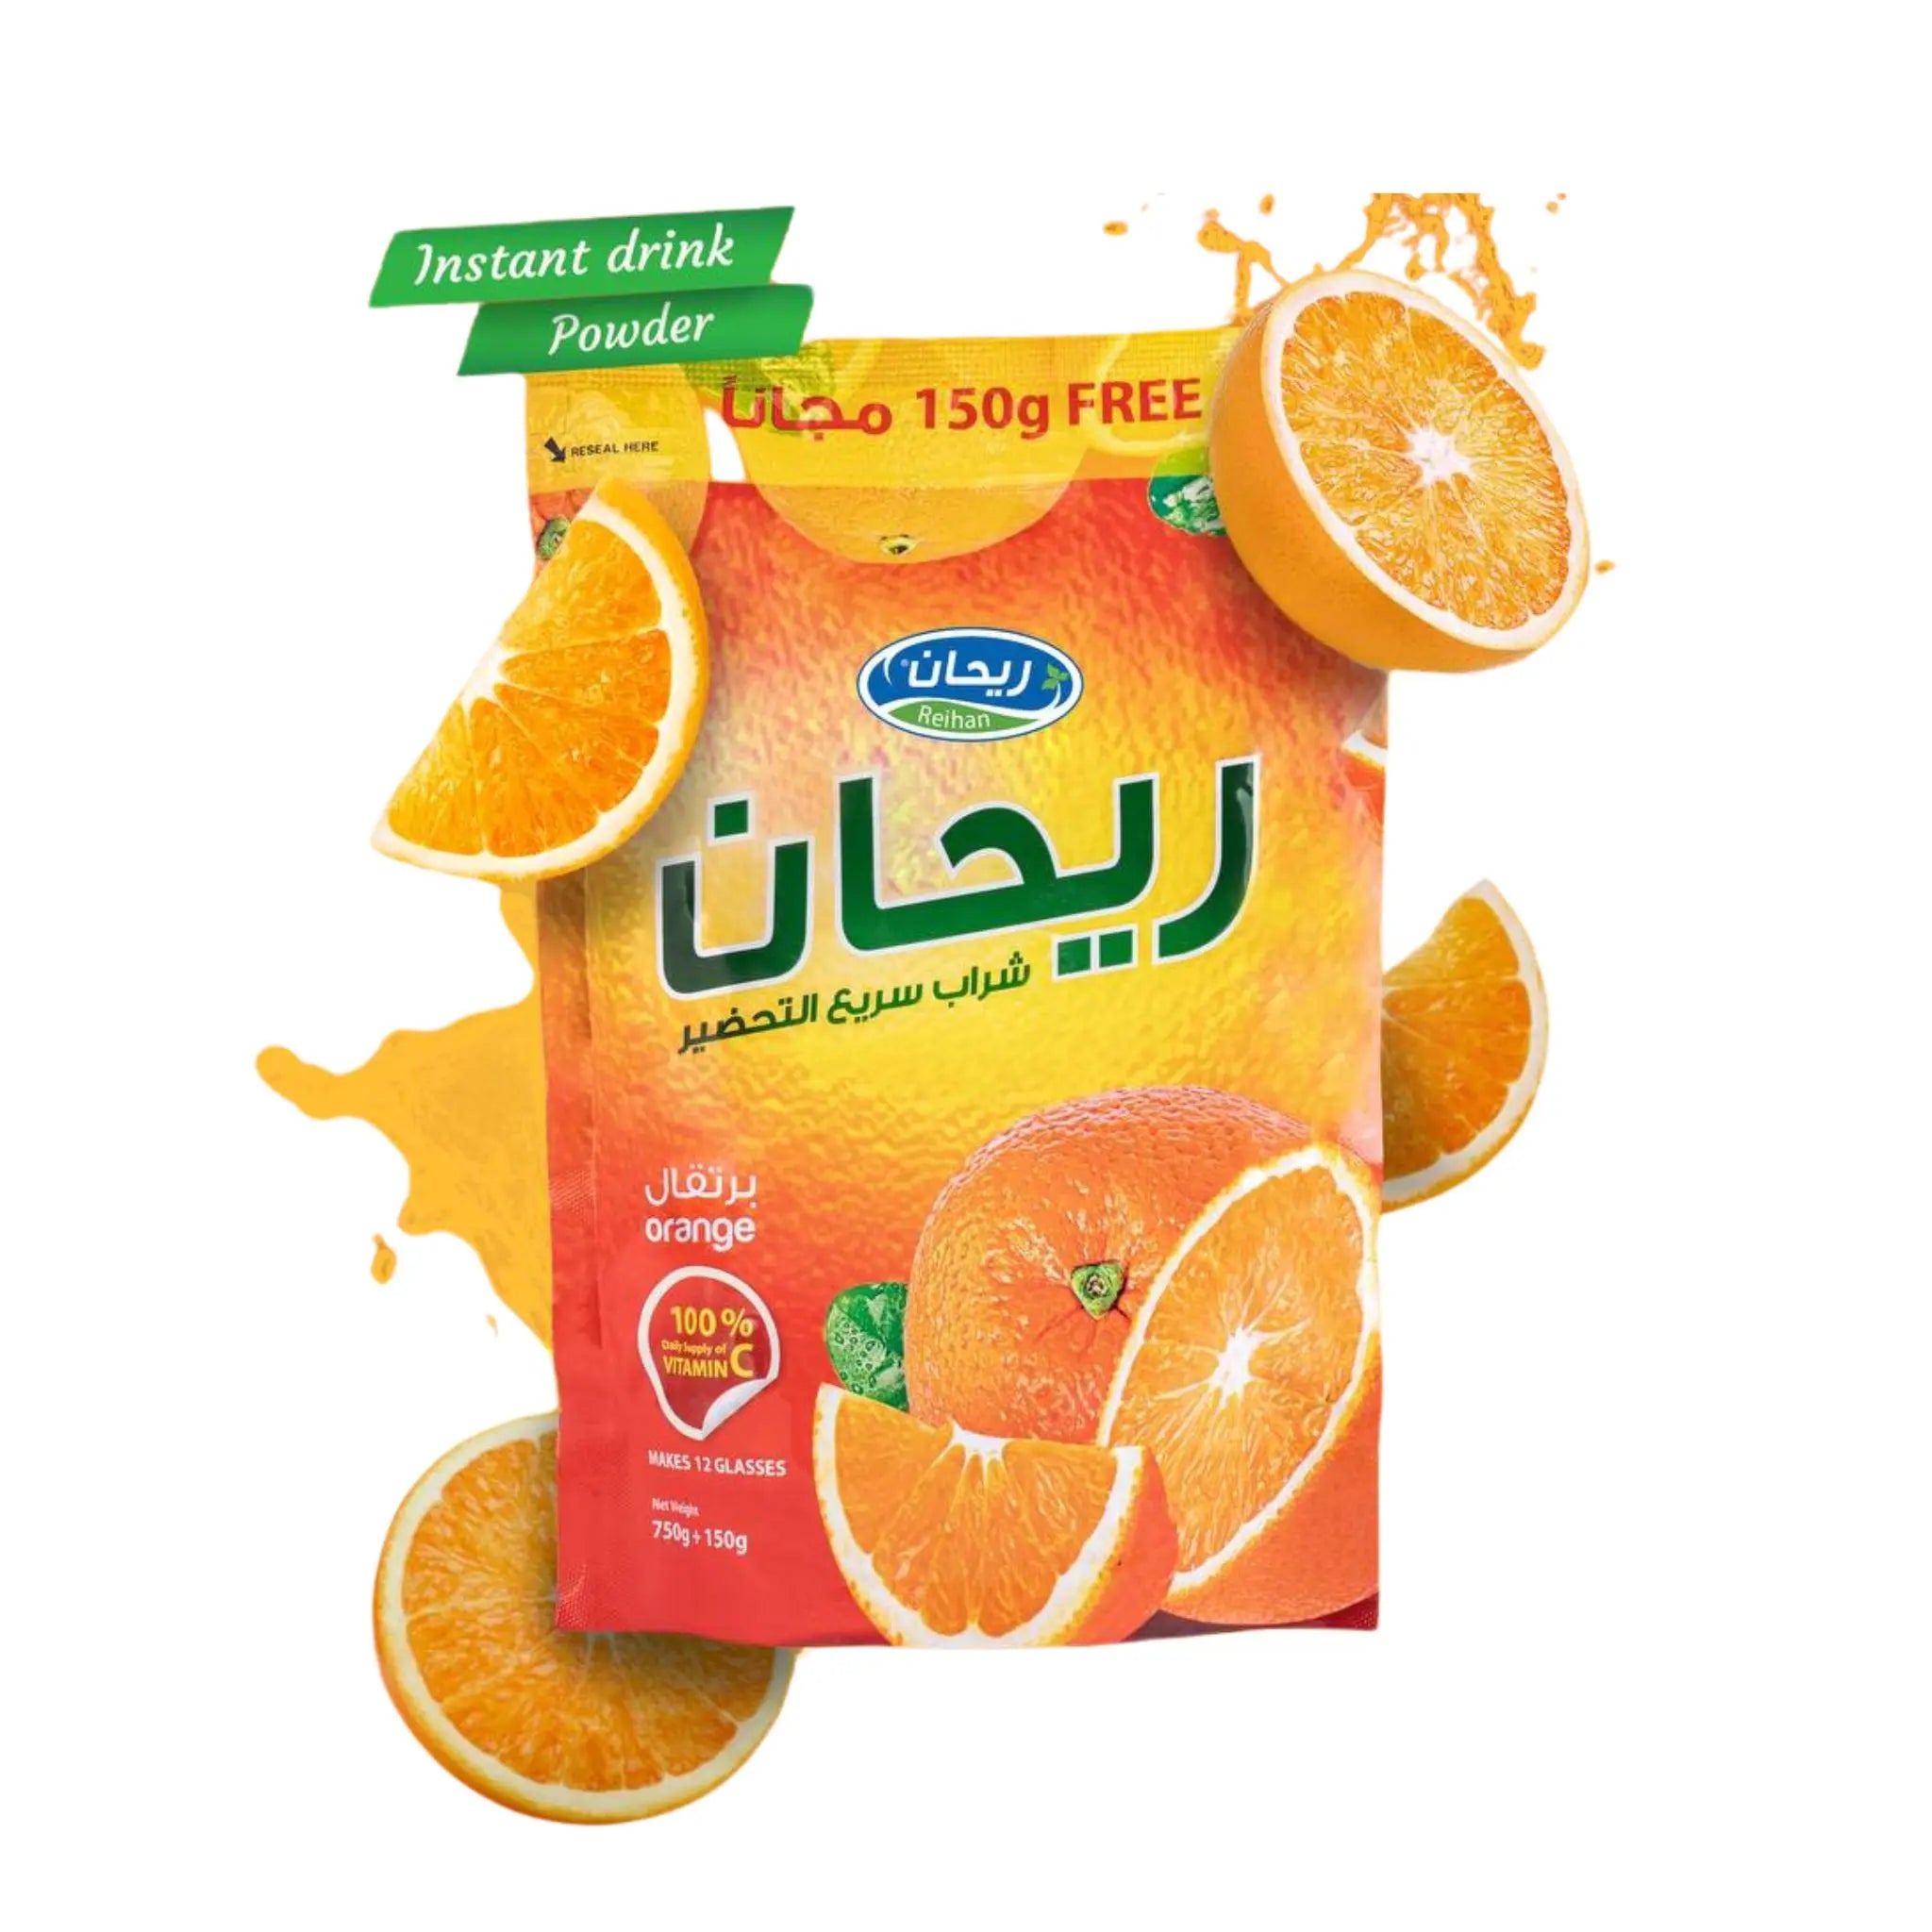 REIHAN INSTANT DRINK ORANGE FLAVOUR 900G [POUCH] - Pack of 5 Marino.AE